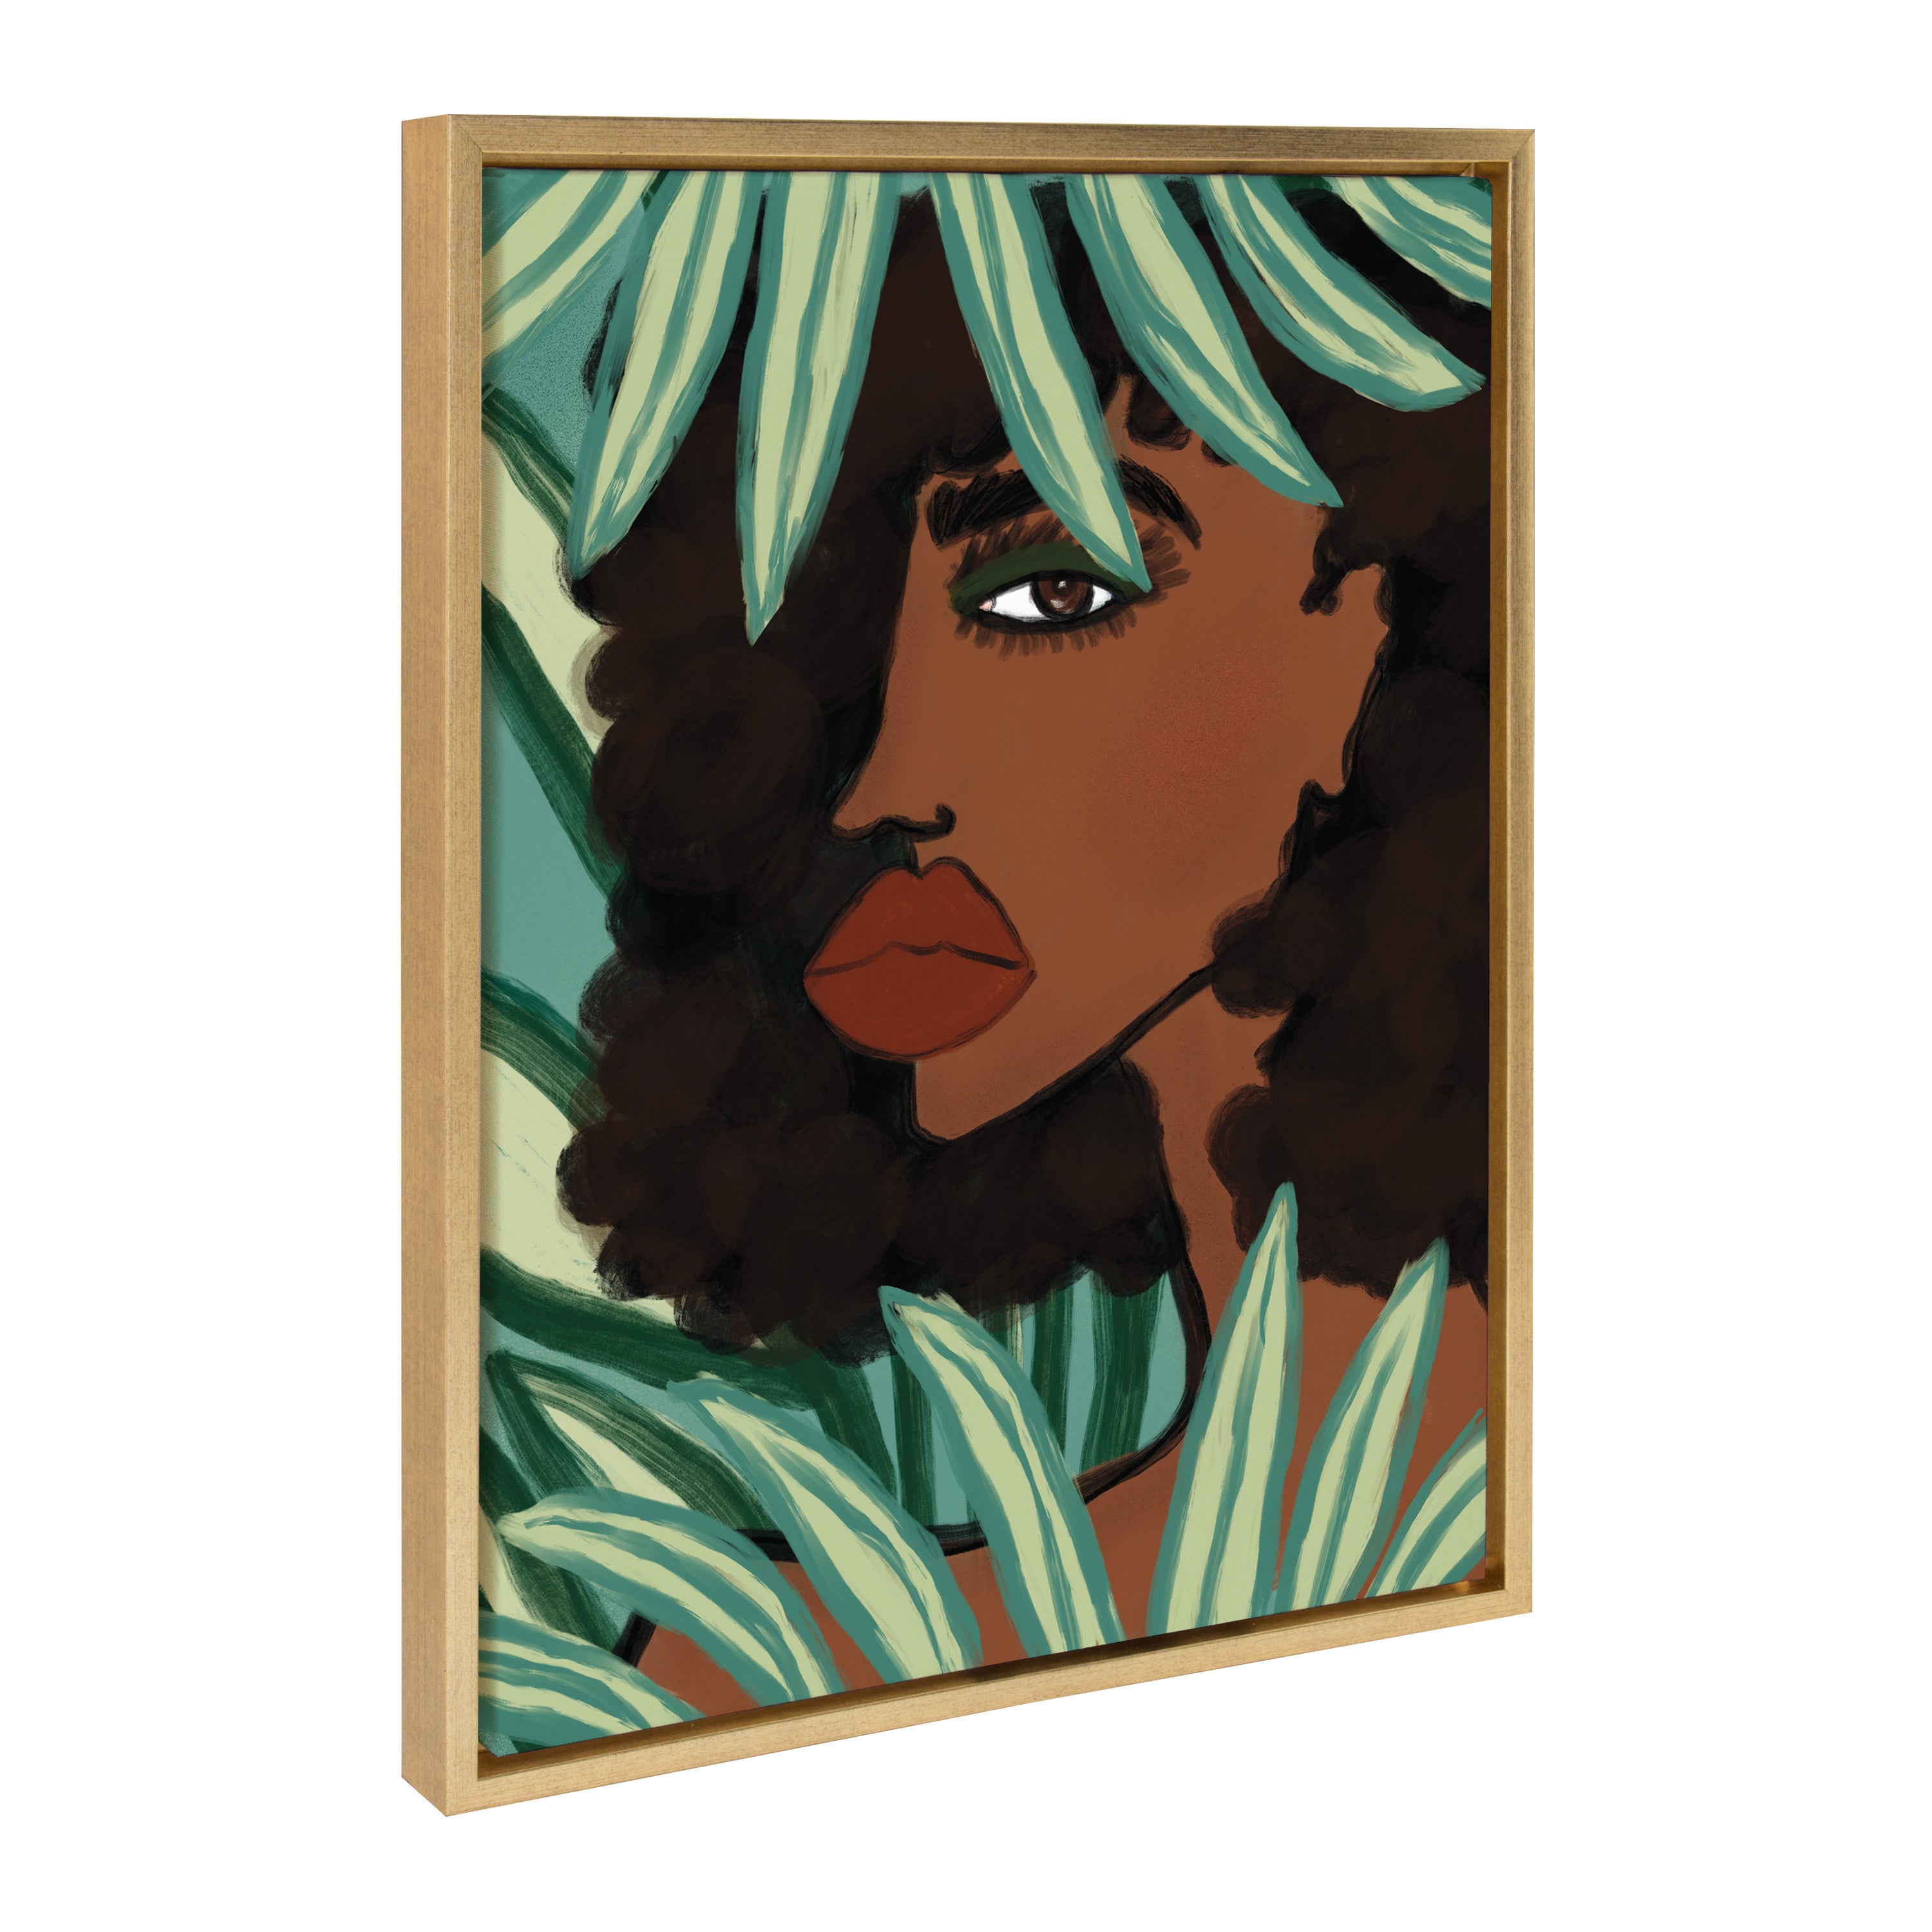 Sylvie Lady in the Jungle Framed Canvas by Kendra Dandy of Bouffants and Broken Hearts